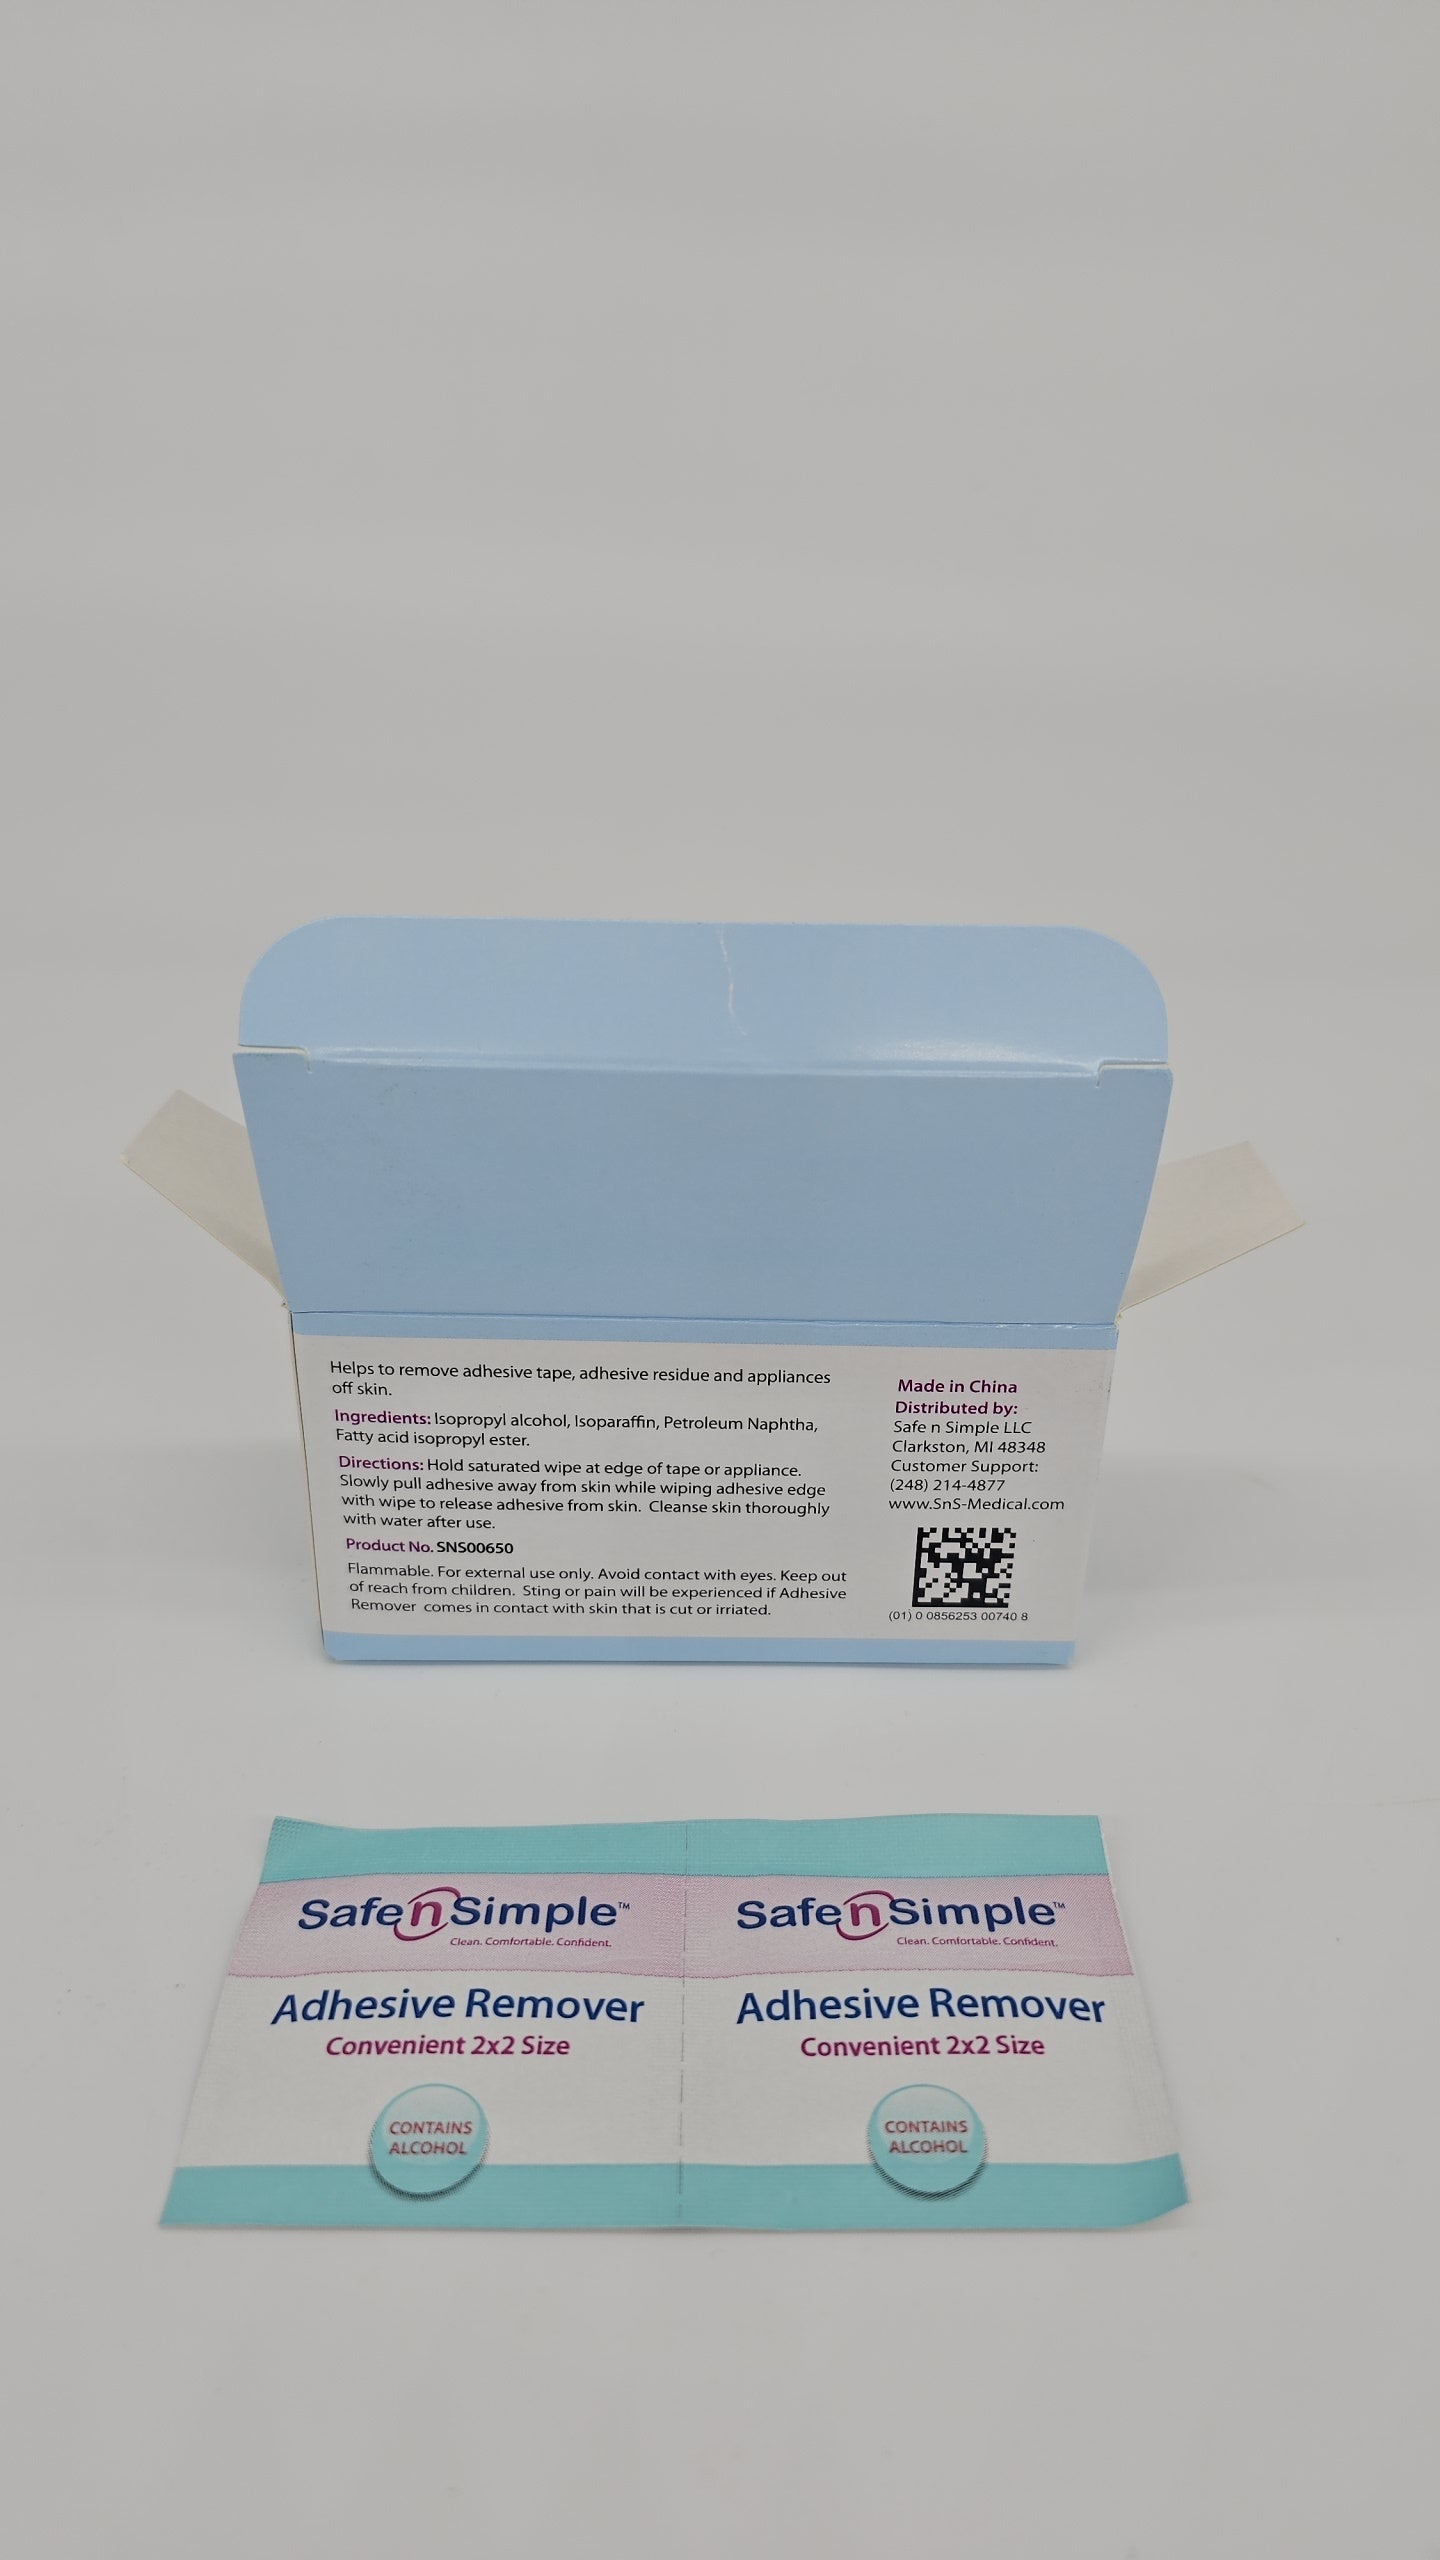 SNS Adhesive Remover, SNS medical, Medical products